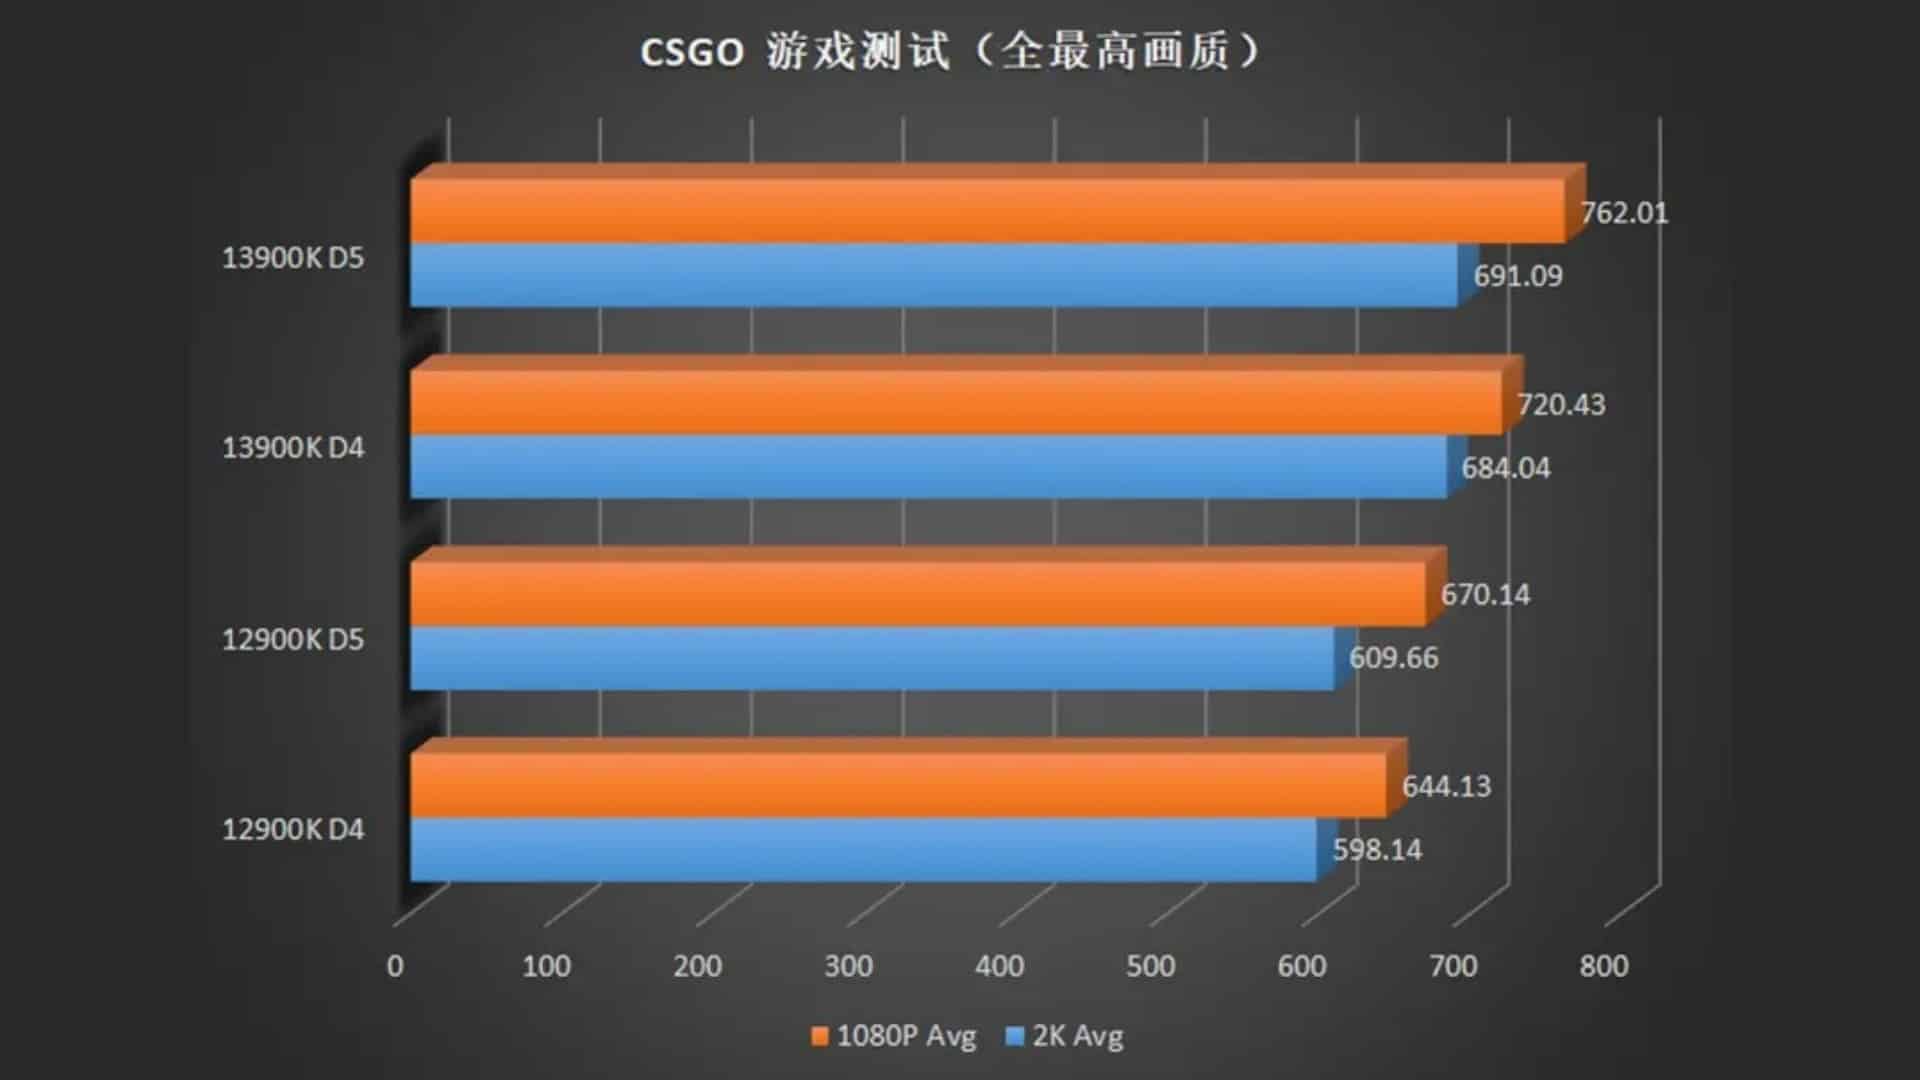 (This is how the Core i9 13900K performs in comparison to its predecessor in CS:GO. (Image source: ECMS_Official))